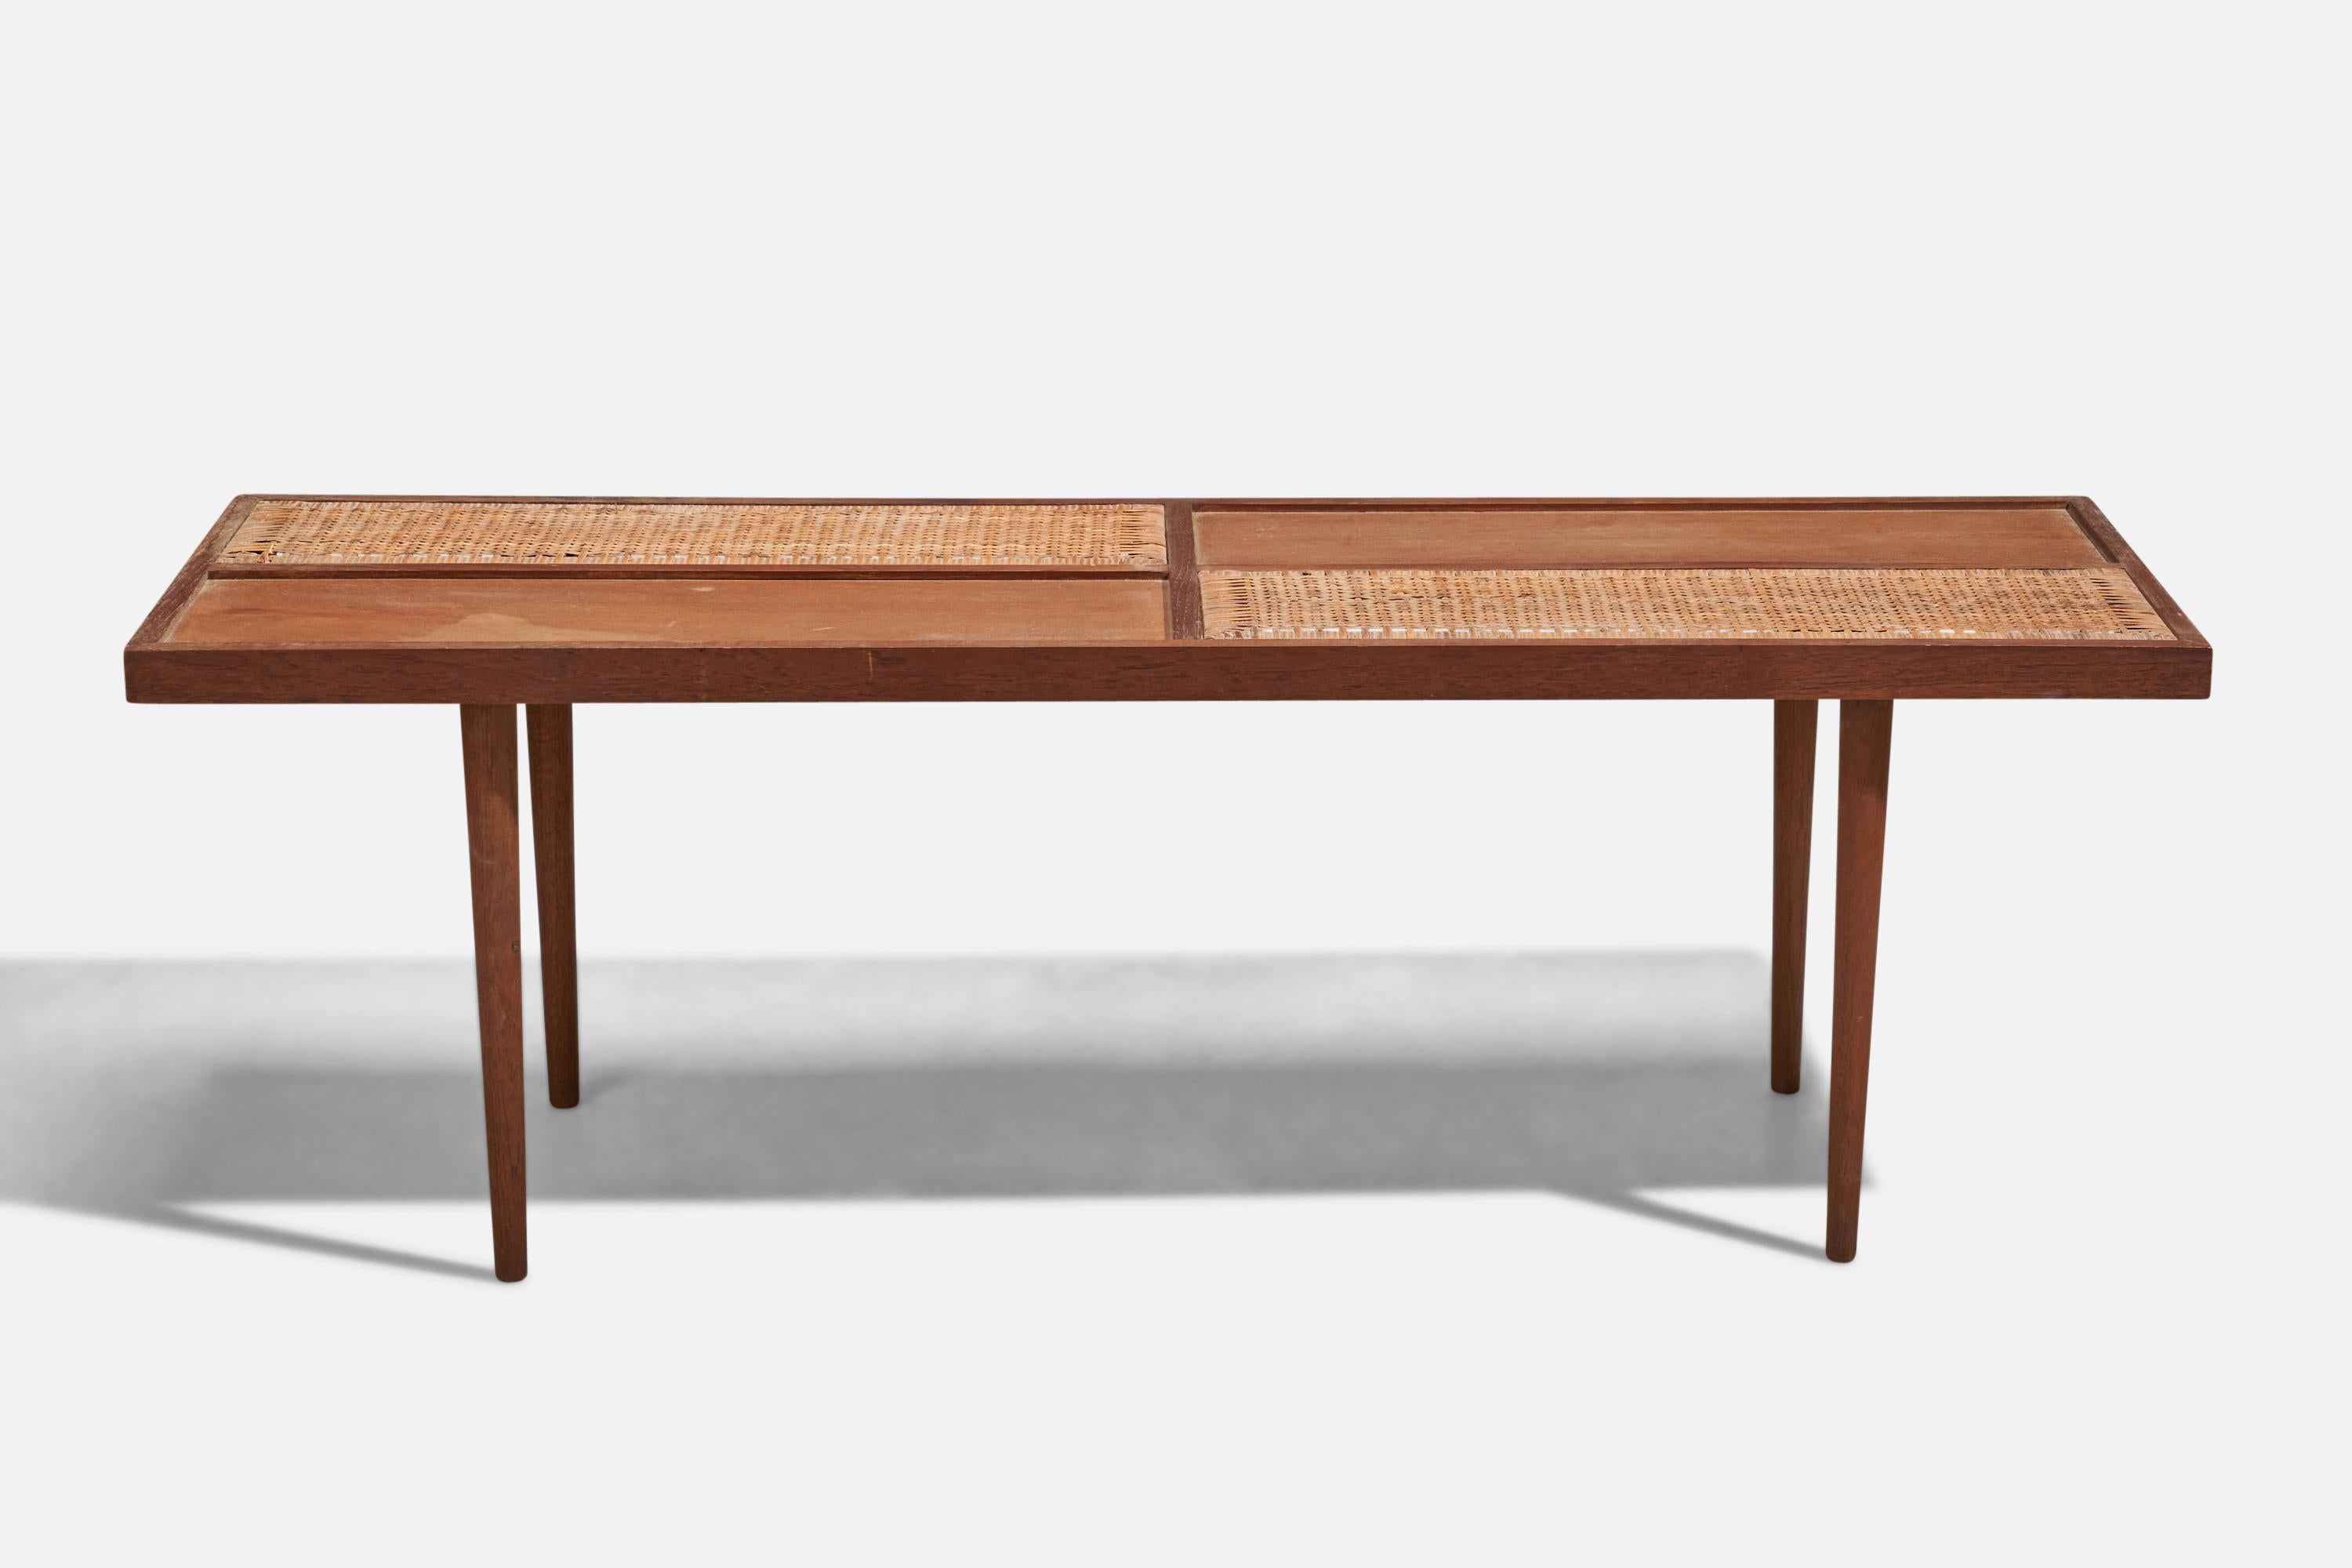 A teak and rattan coffee table designed and produced by Sweet Home, Hong Kong, 1970s.